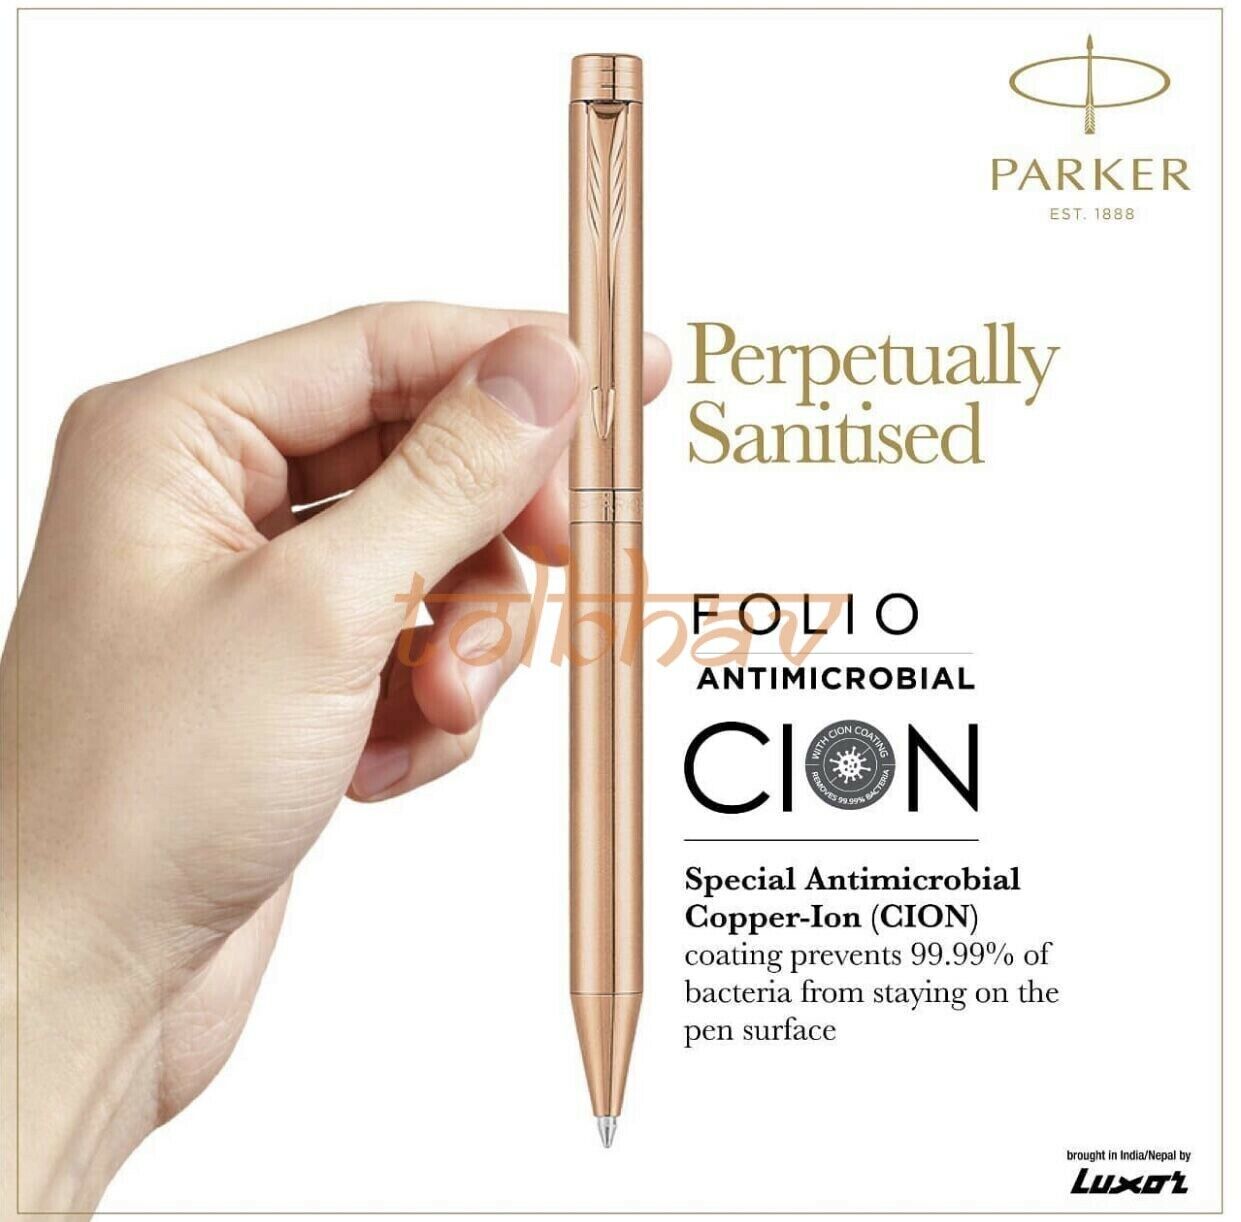 Parker Folio Anti Microbial Copper Ion Plated Ball Point Pen - CION Coated